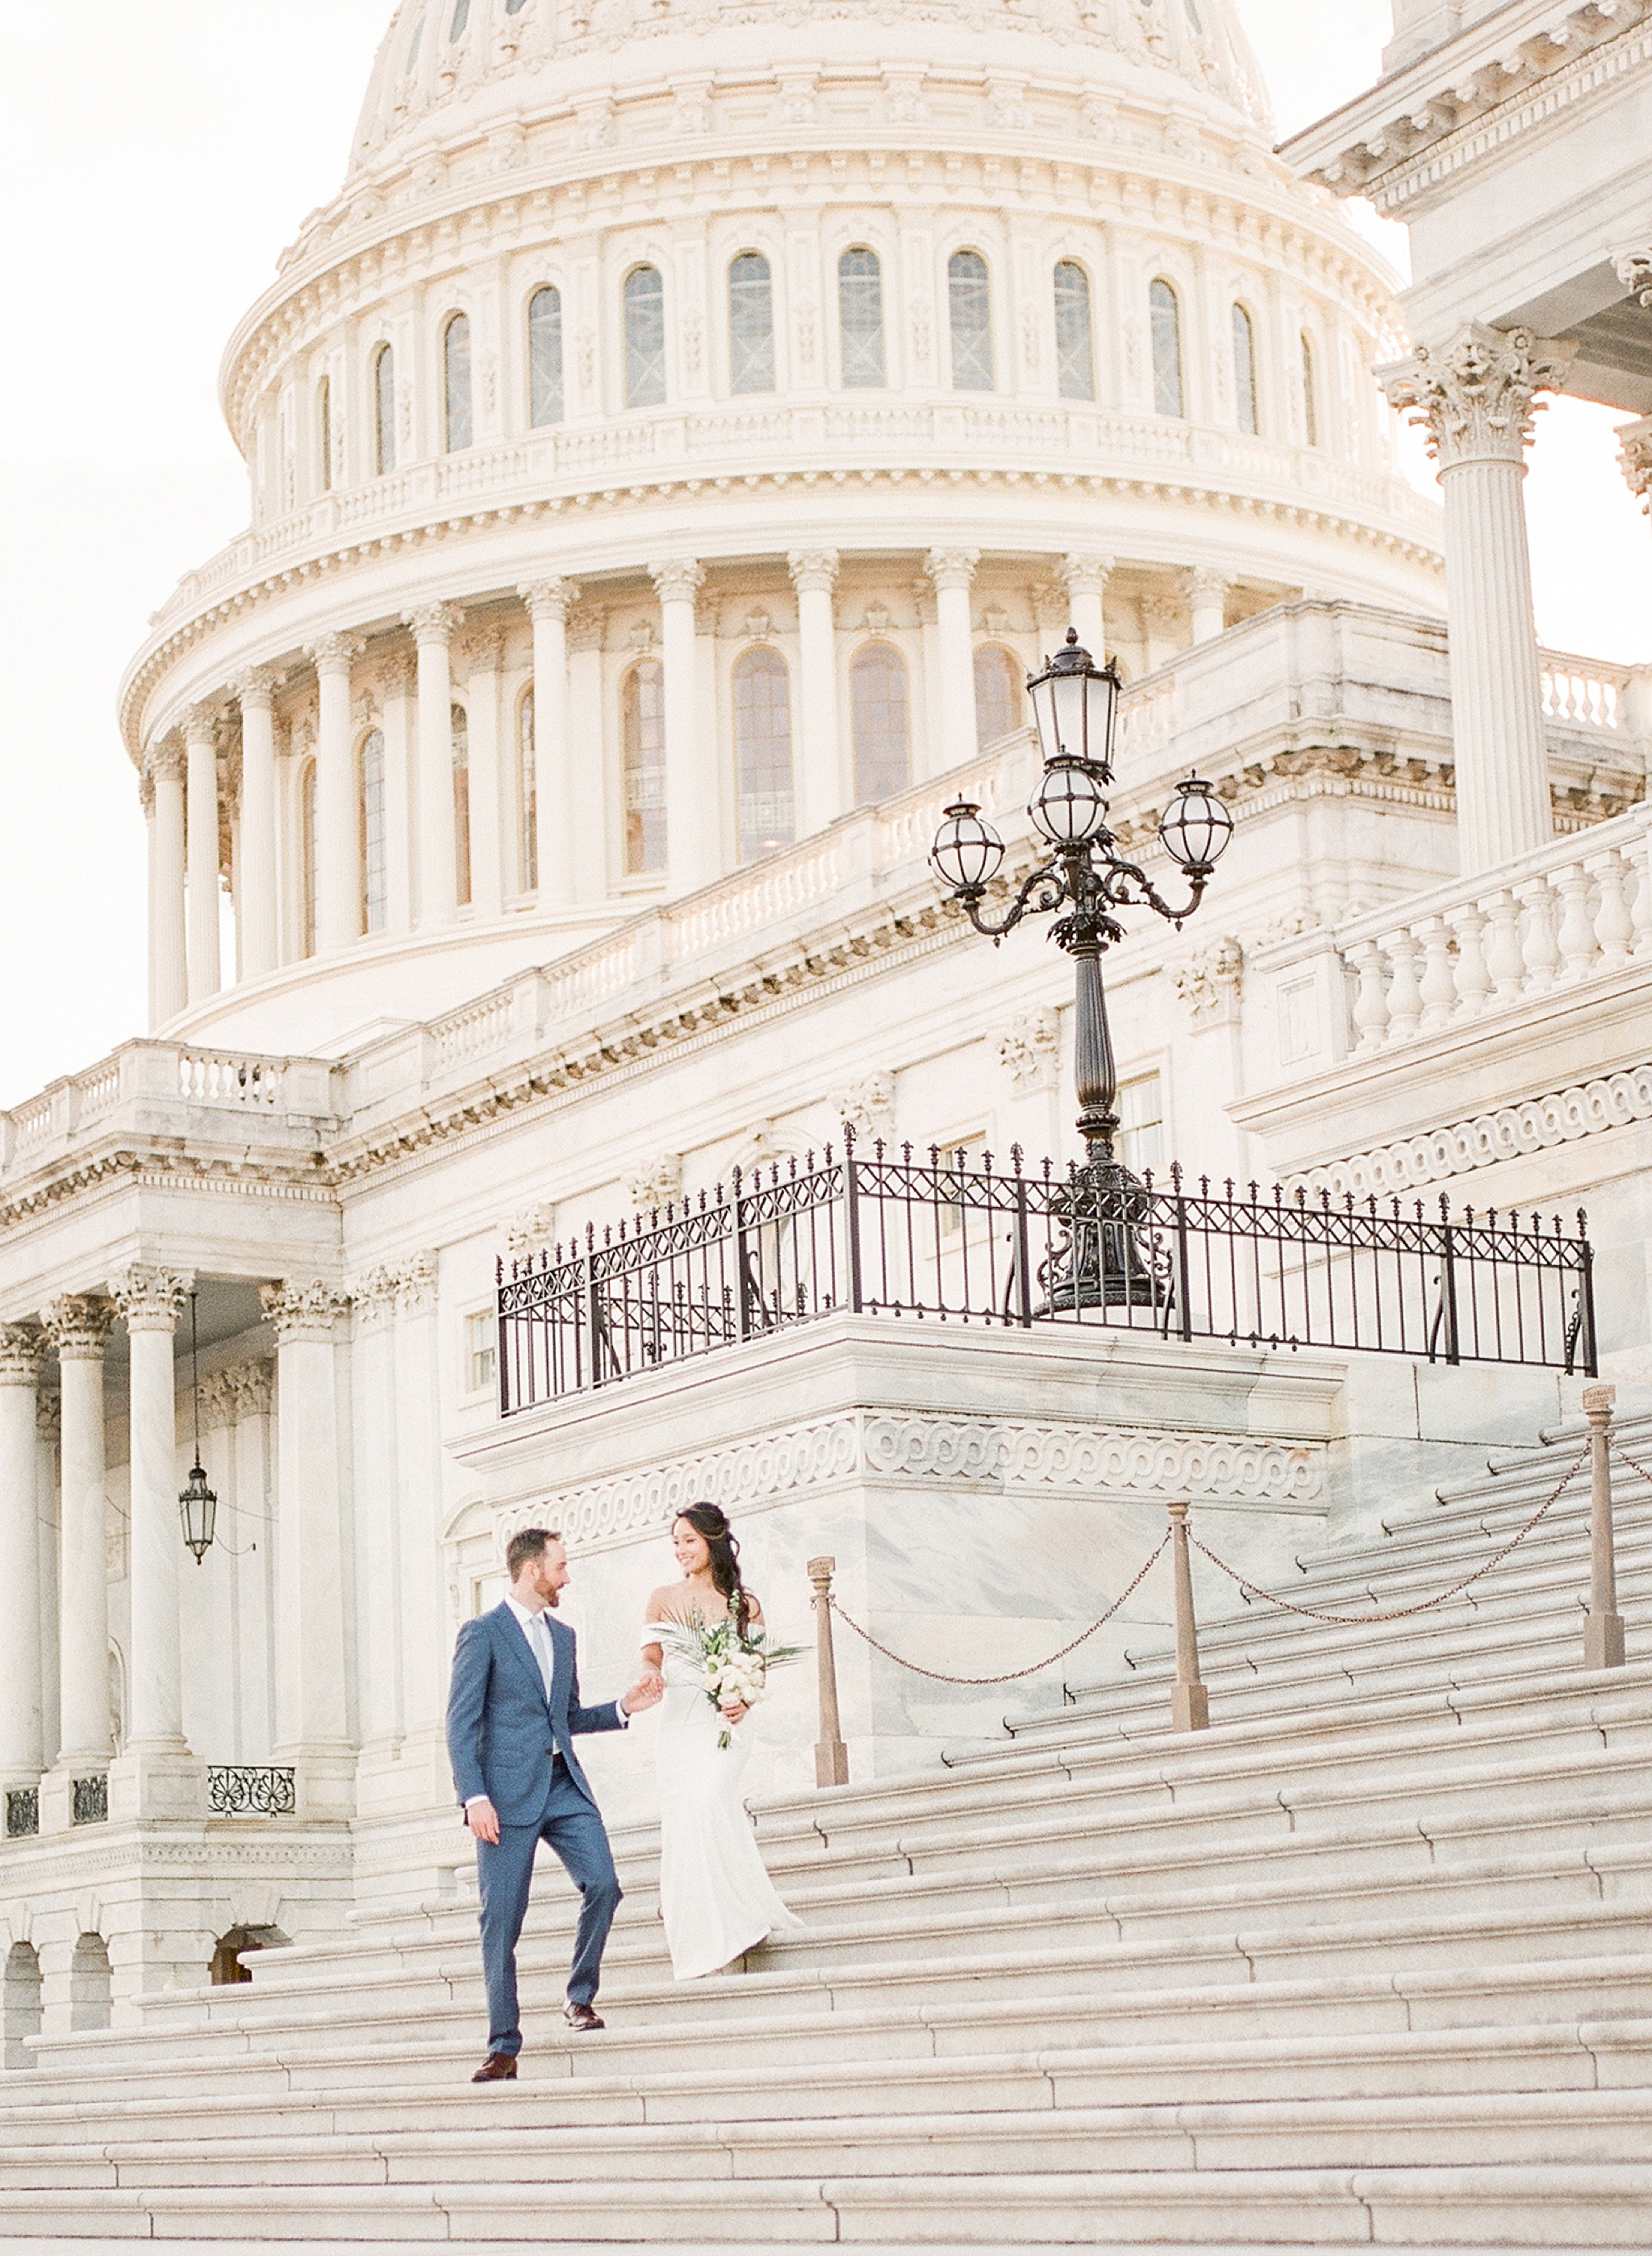 A romantic wedding elopement in Washington, DC; photographed by fine art film photographer, Alicia Lacey.